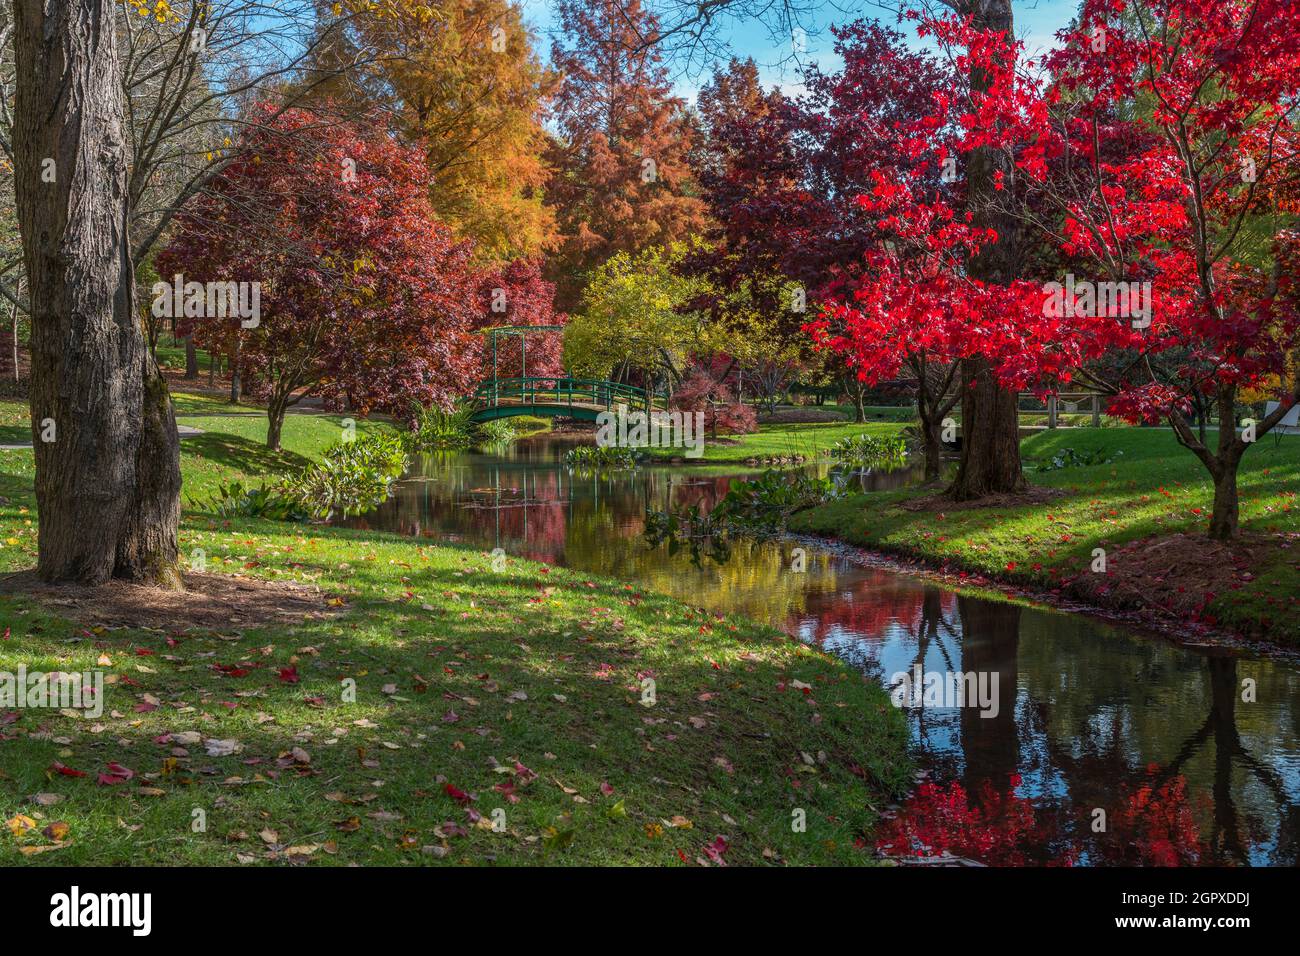 Picturesque setting of the water garden with aquatic plants and reflections of the bright vibrant colors of the trees in the pond with the small bridg Stock Photo